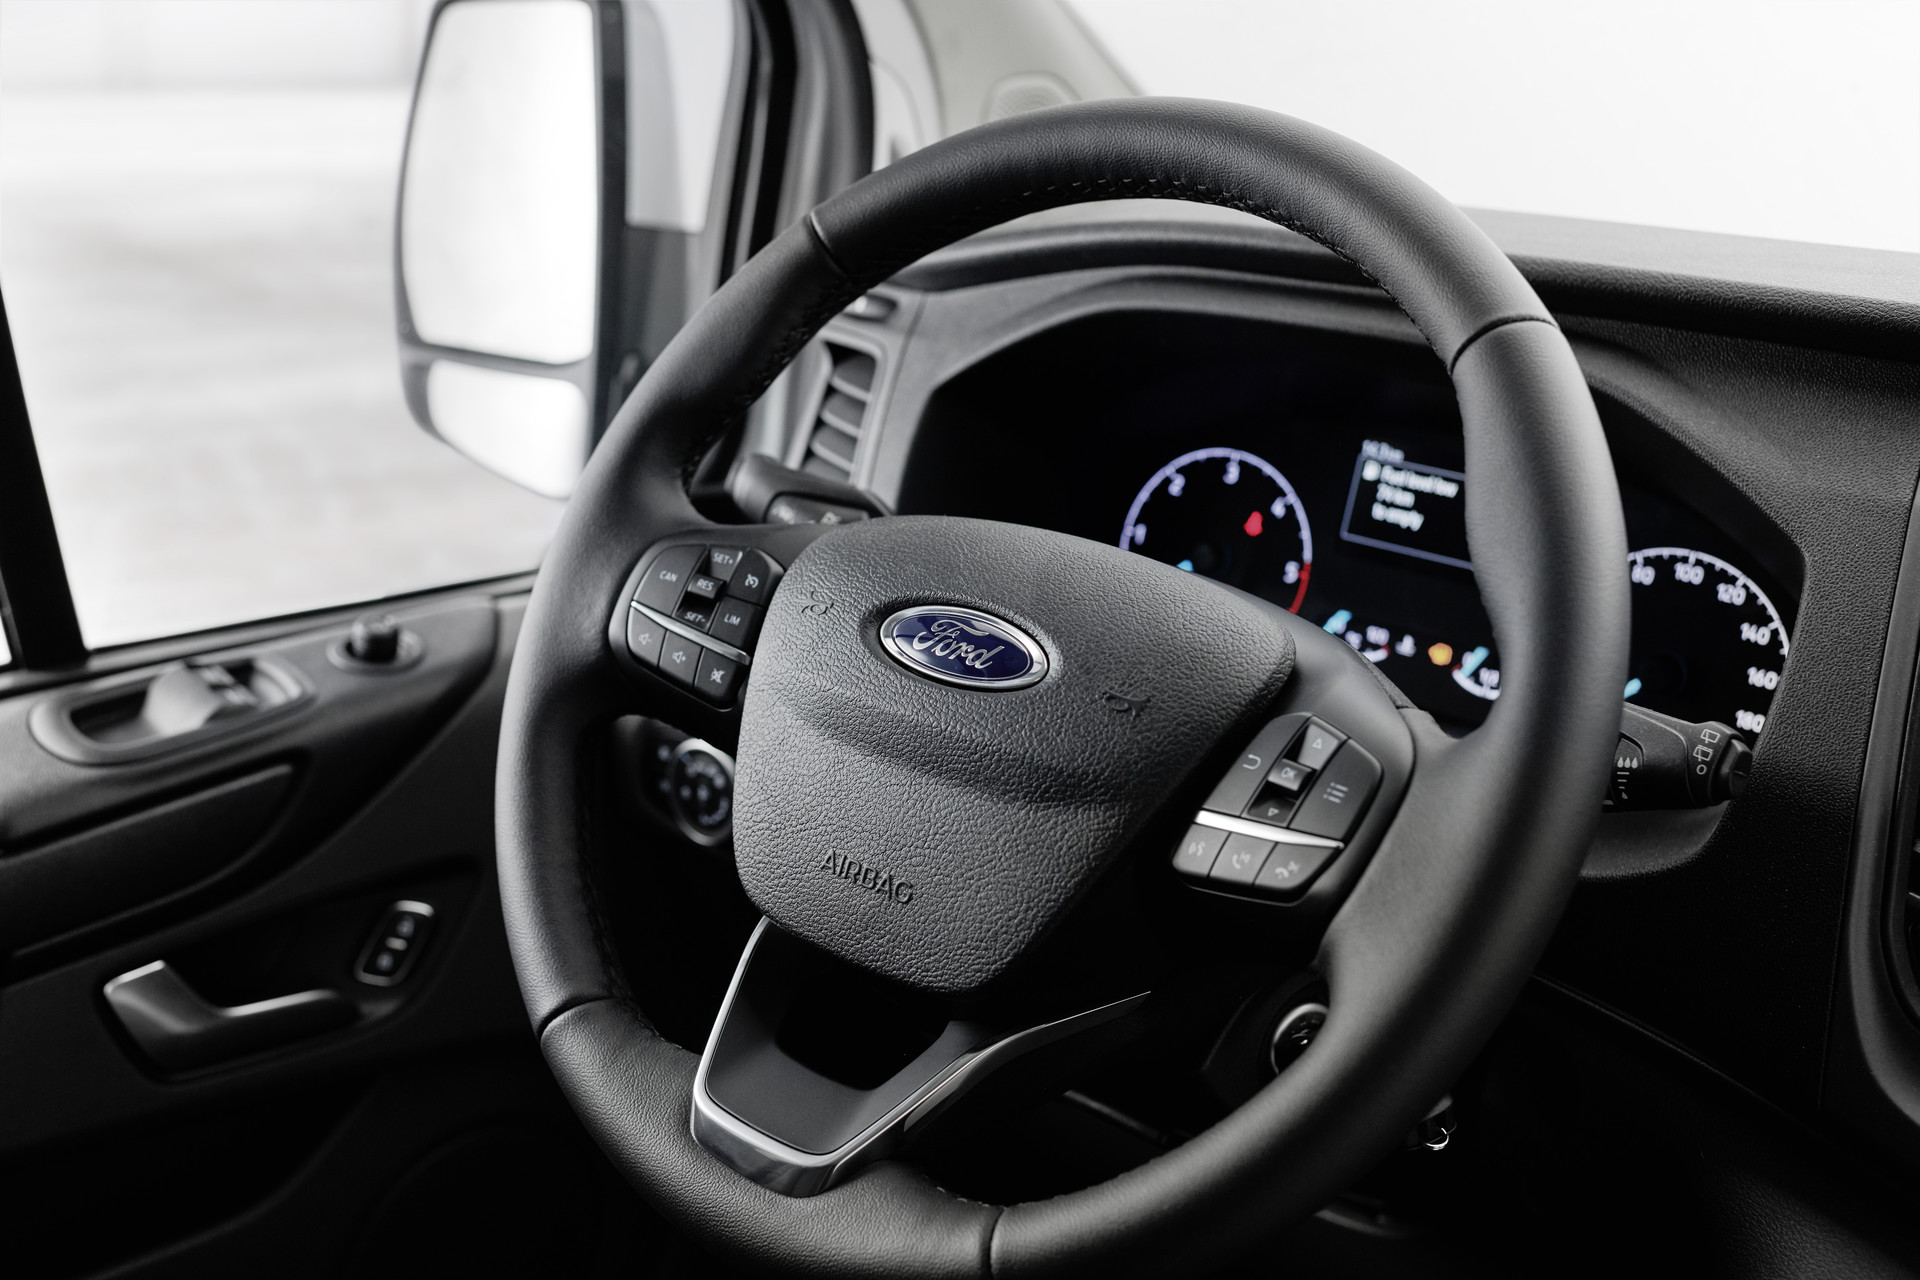 Integrated control panel and audio remote controls on the steering wheel, Lane Assist with Driver Alert and High Beam Assist, Emergency Brake Assist including emergency brake light, Hill Start Assist, Park Pilot System at front and rear.